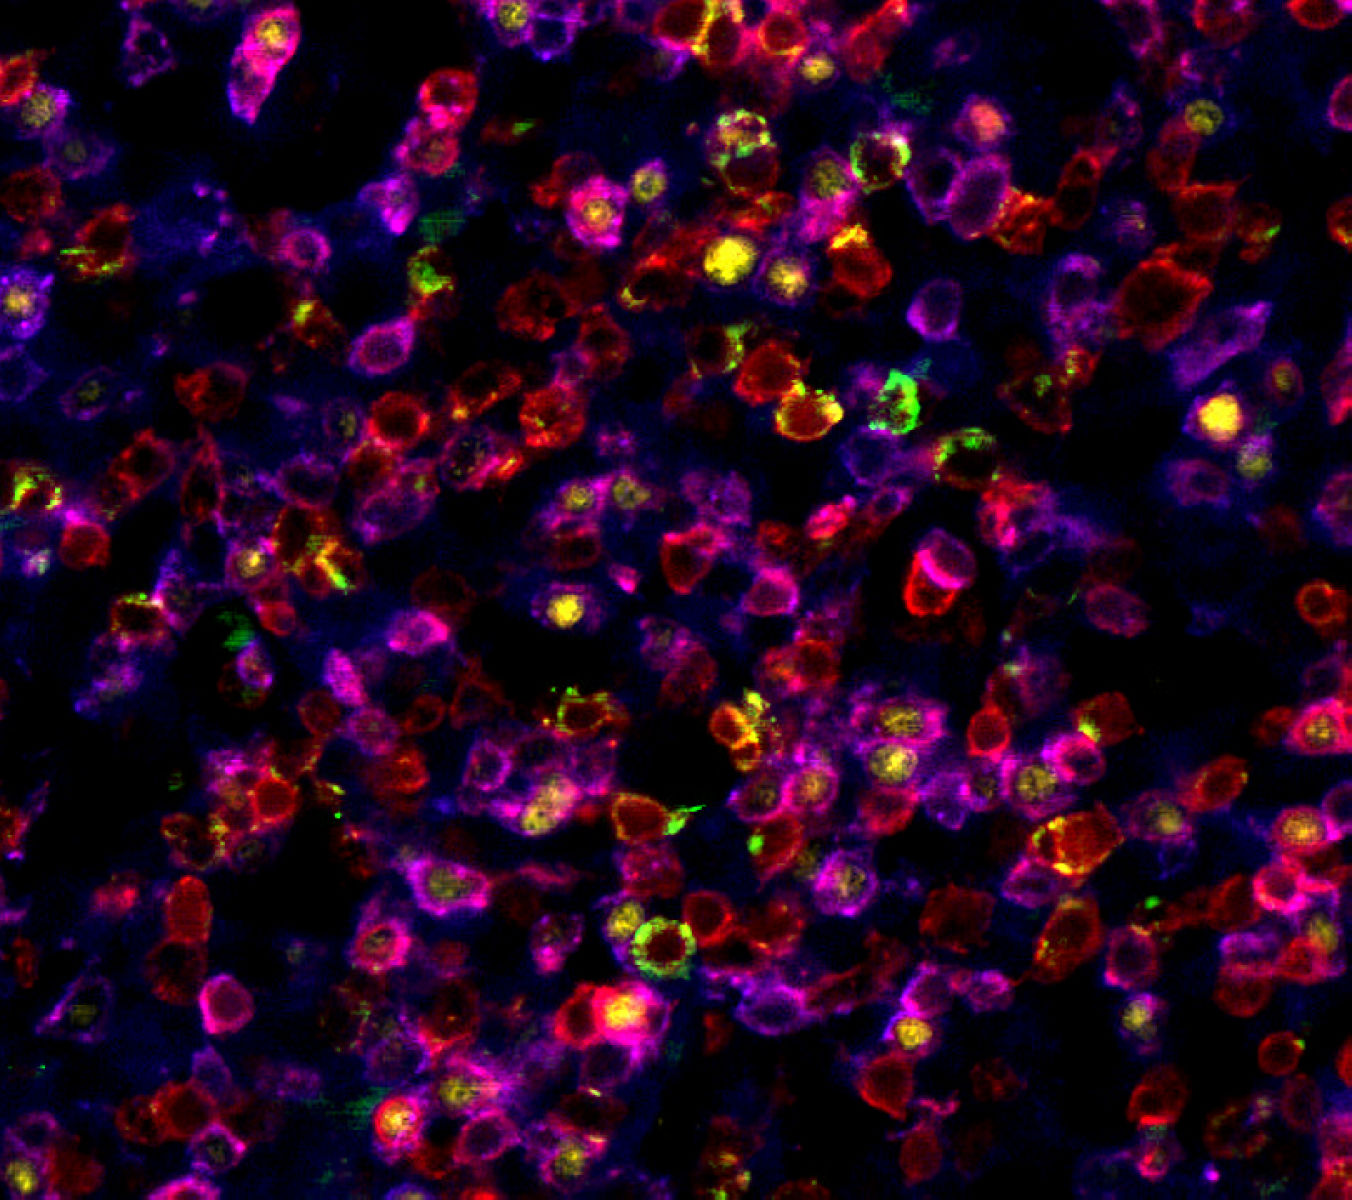 Anaplastic large cell lymphoma biopsy � lymph node - stained manually with HI-6A UltraPlex panel: CD3 (red), FoxP3 (yellow), CD8 (green), CD4 (purple). 20X magnification.